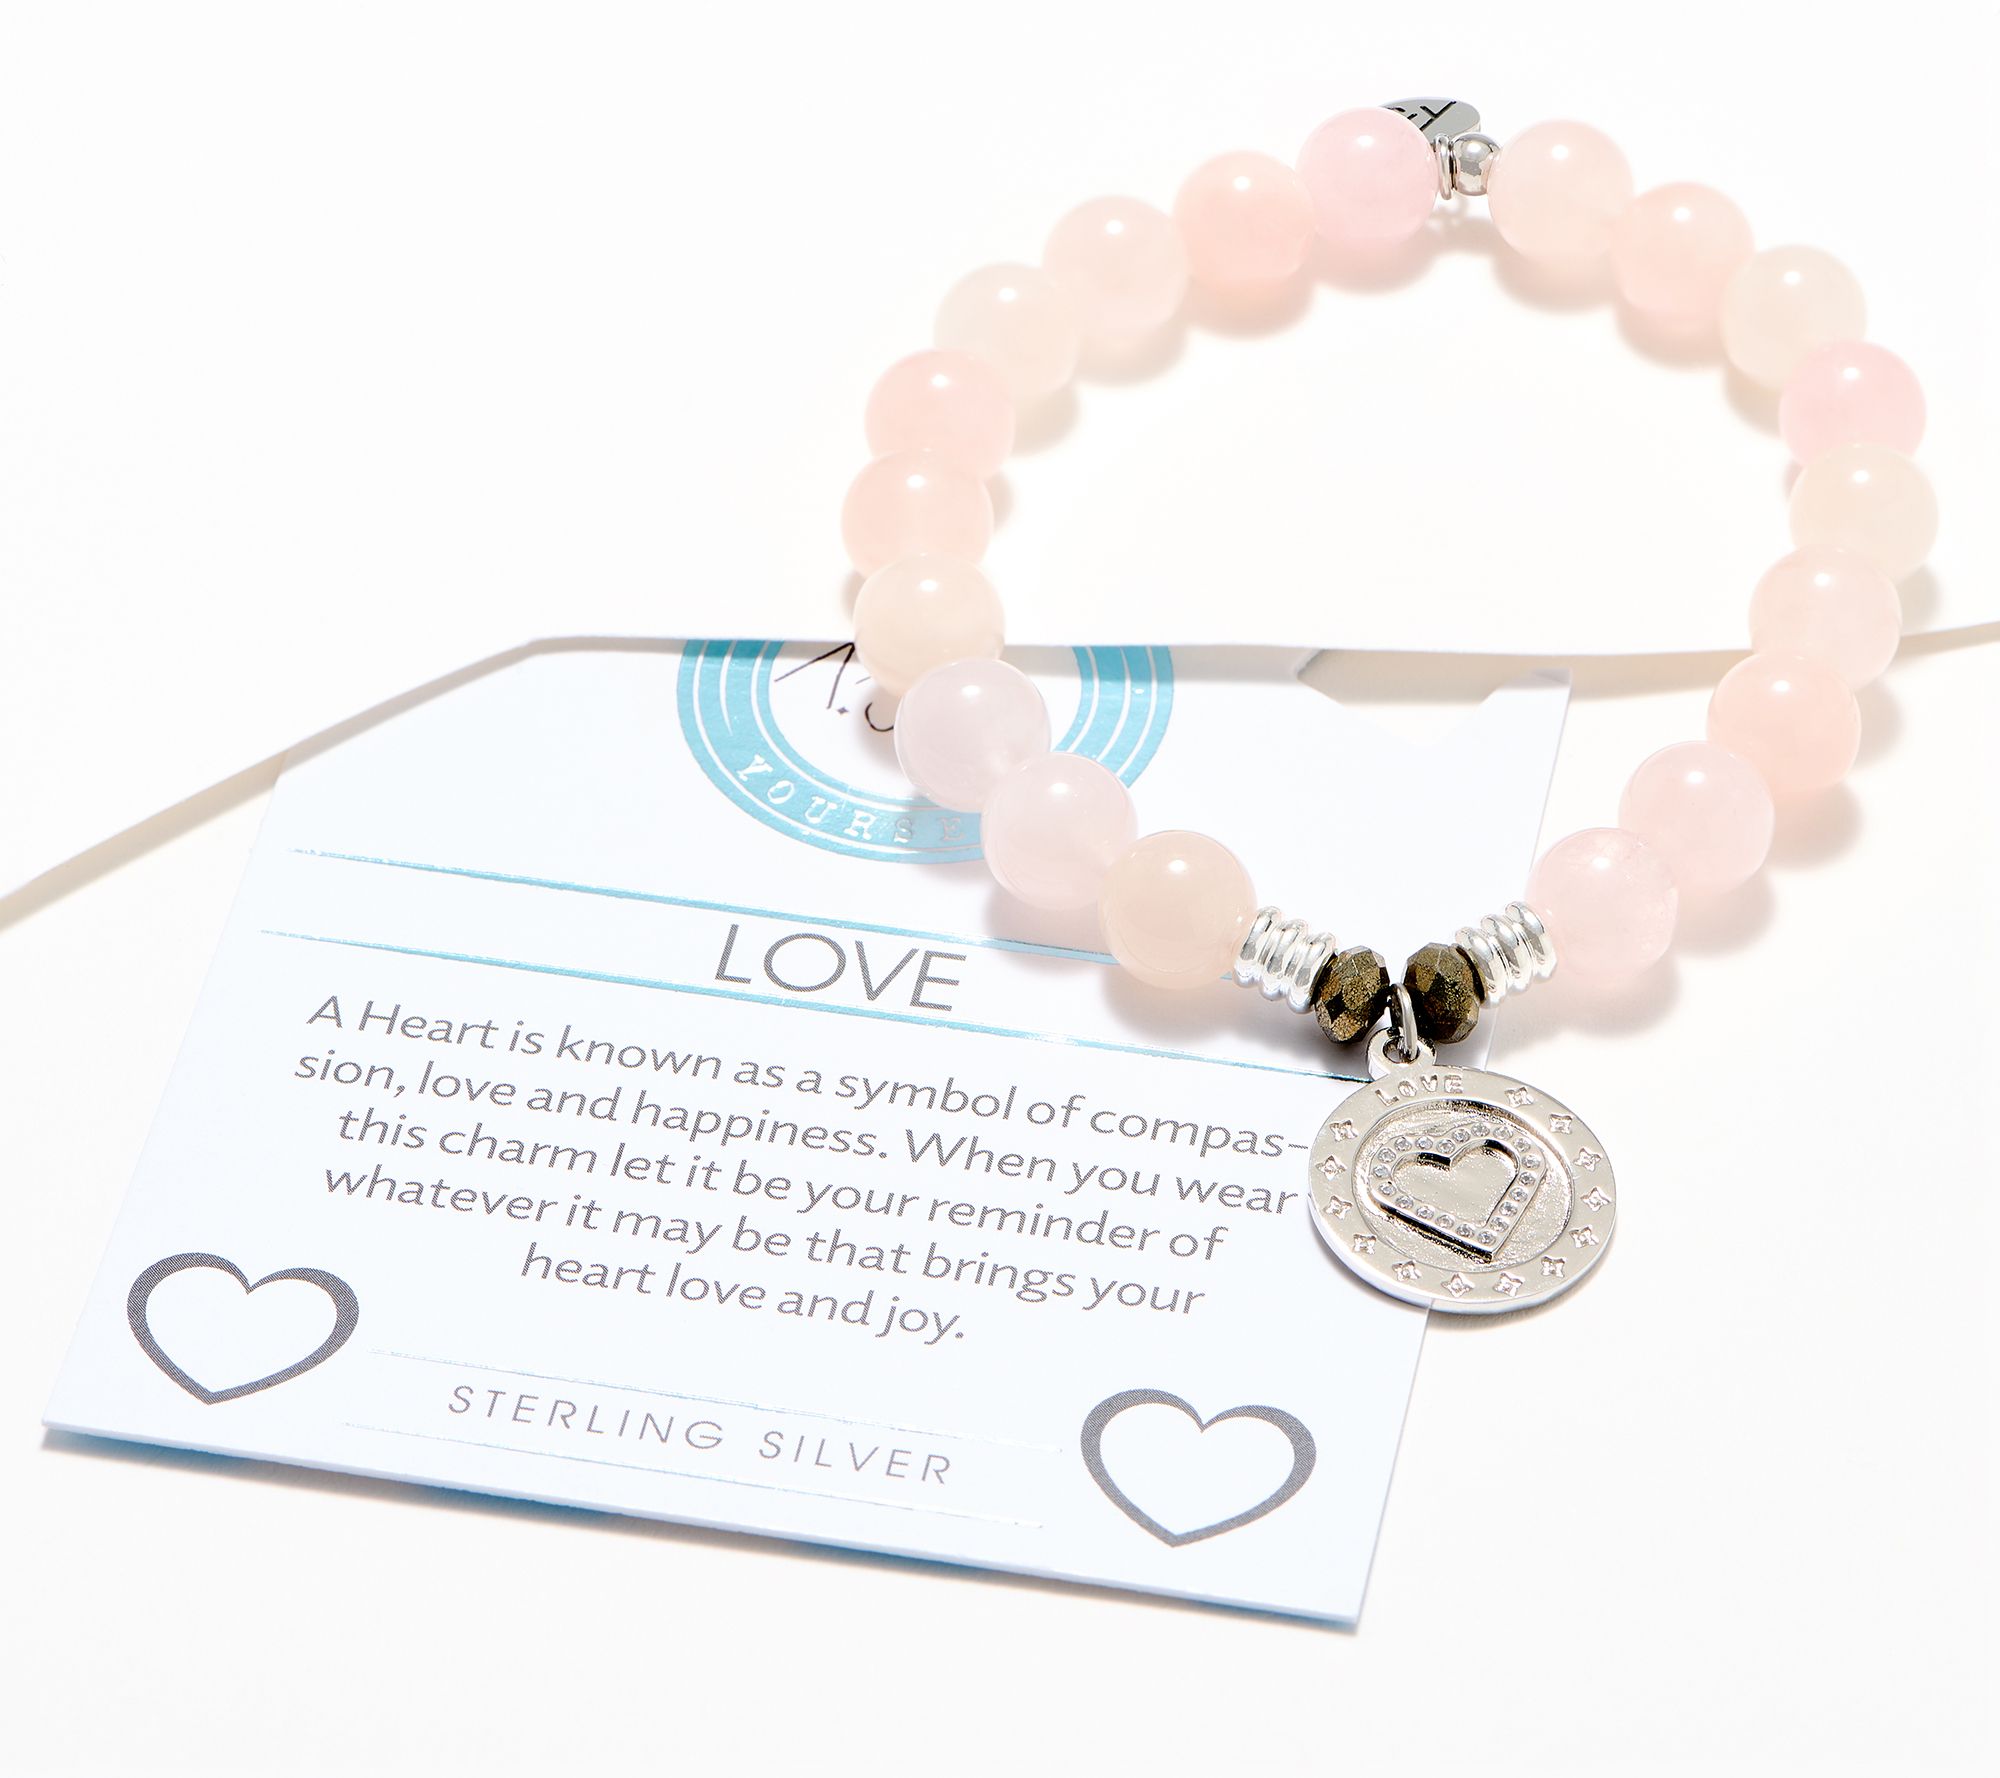 Wellbeing bracelet for protection and health wishes - Angel